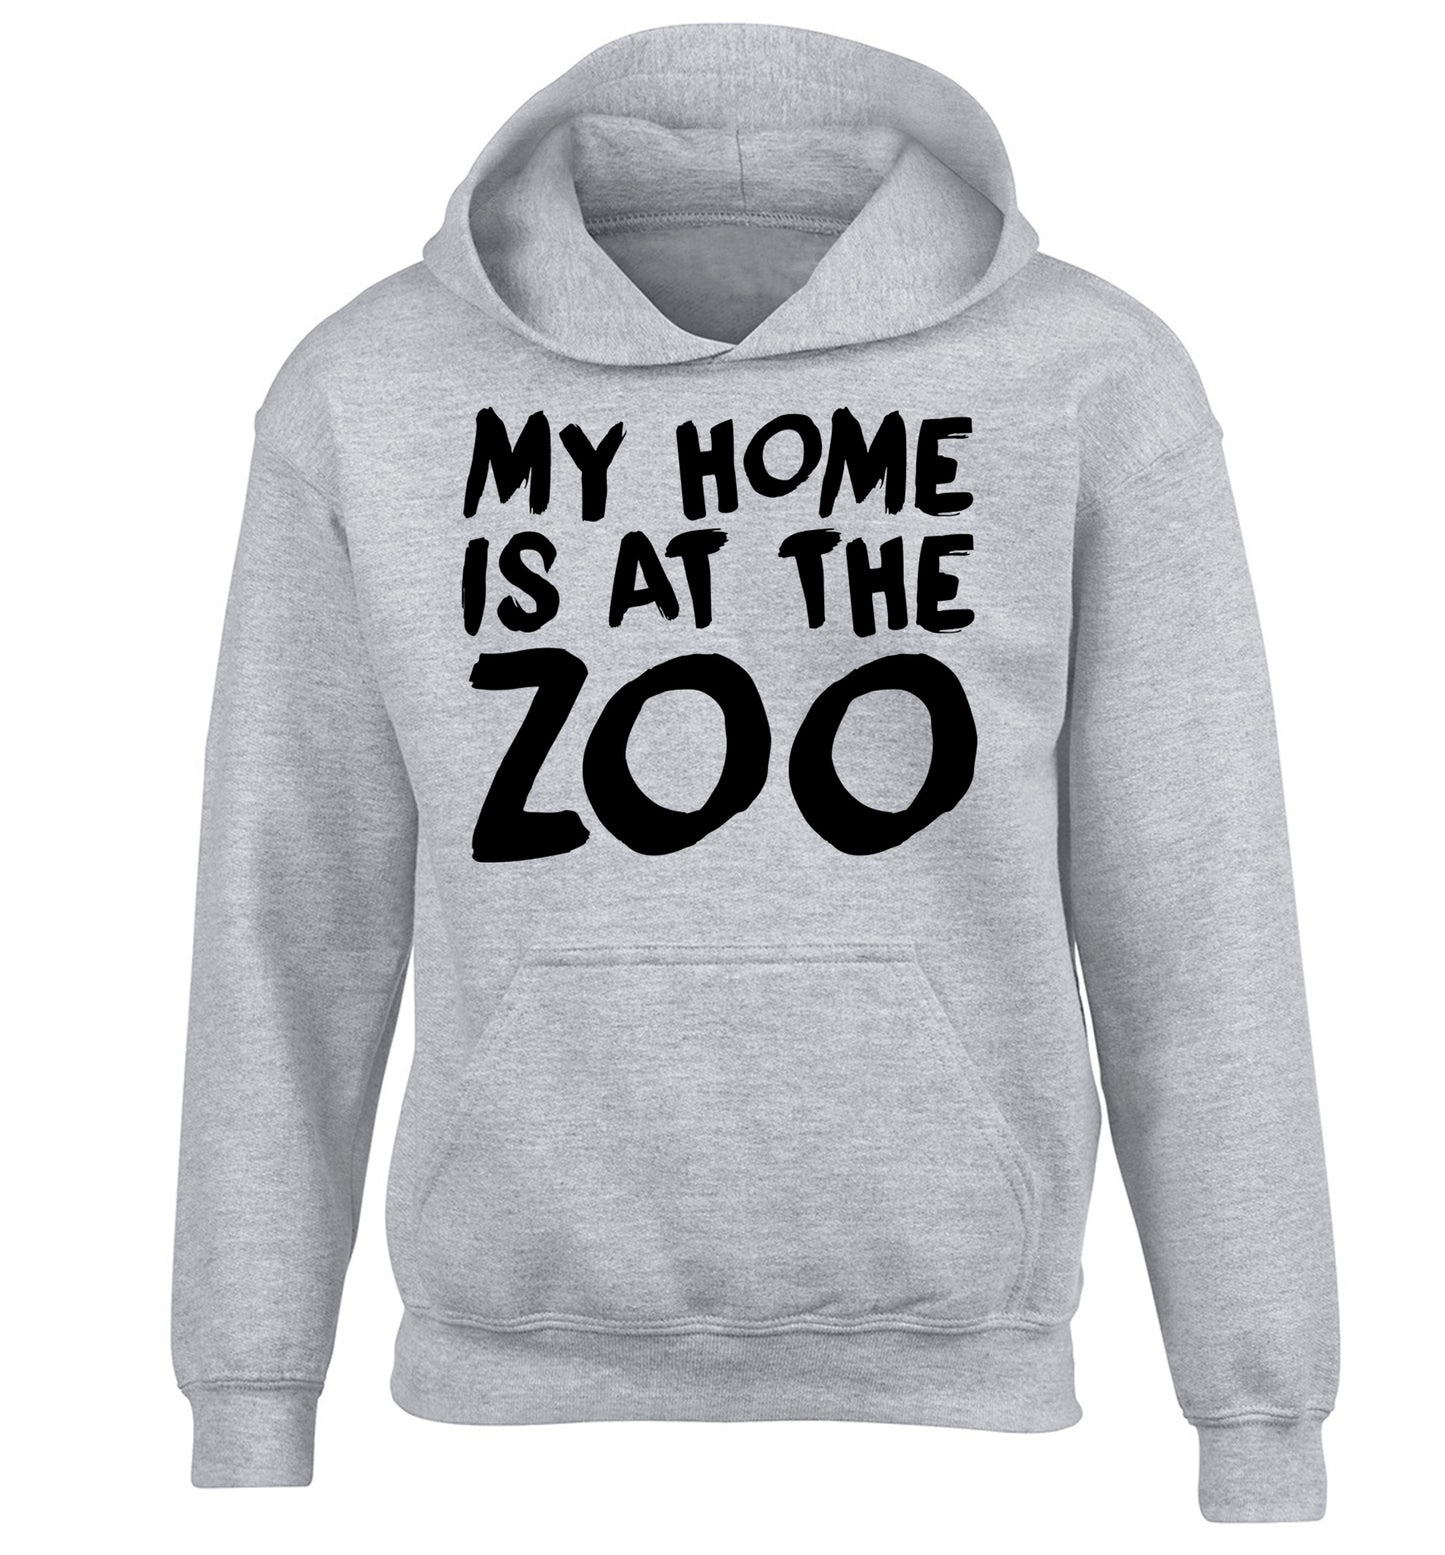 My home is at the zoo children's grey hoodie 12-14 Years